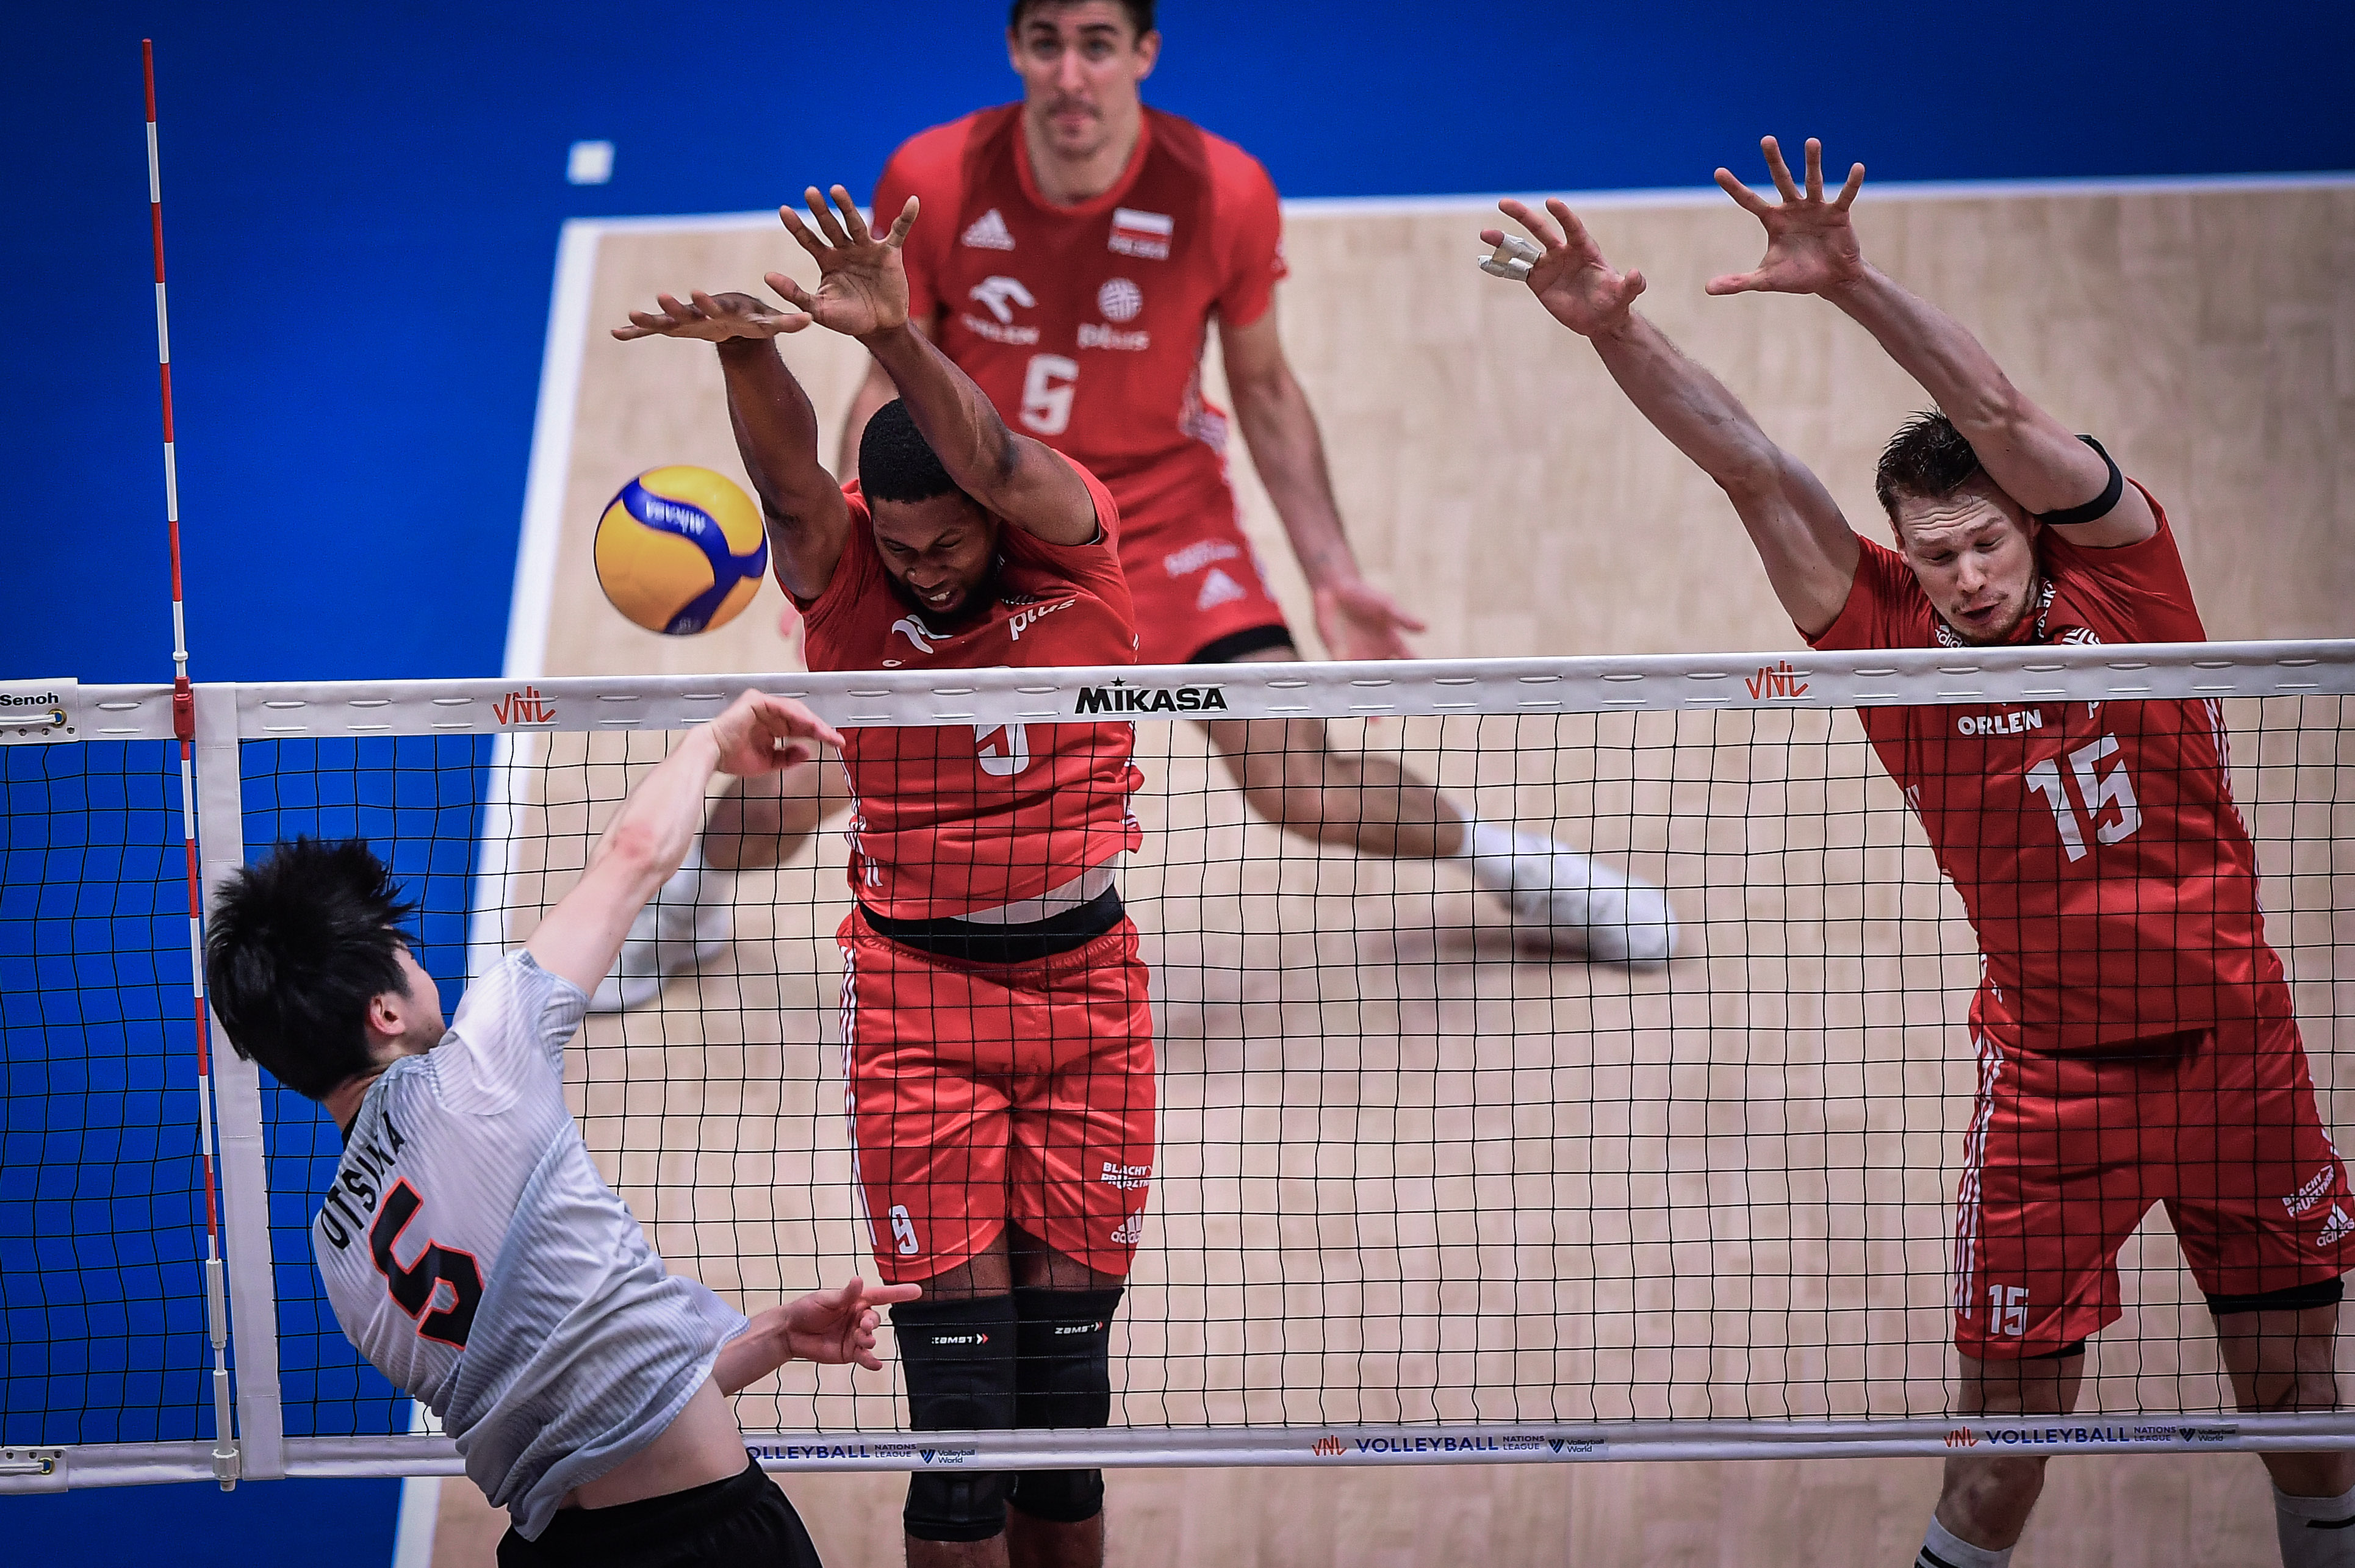 Poland beat Japan to finish in top three